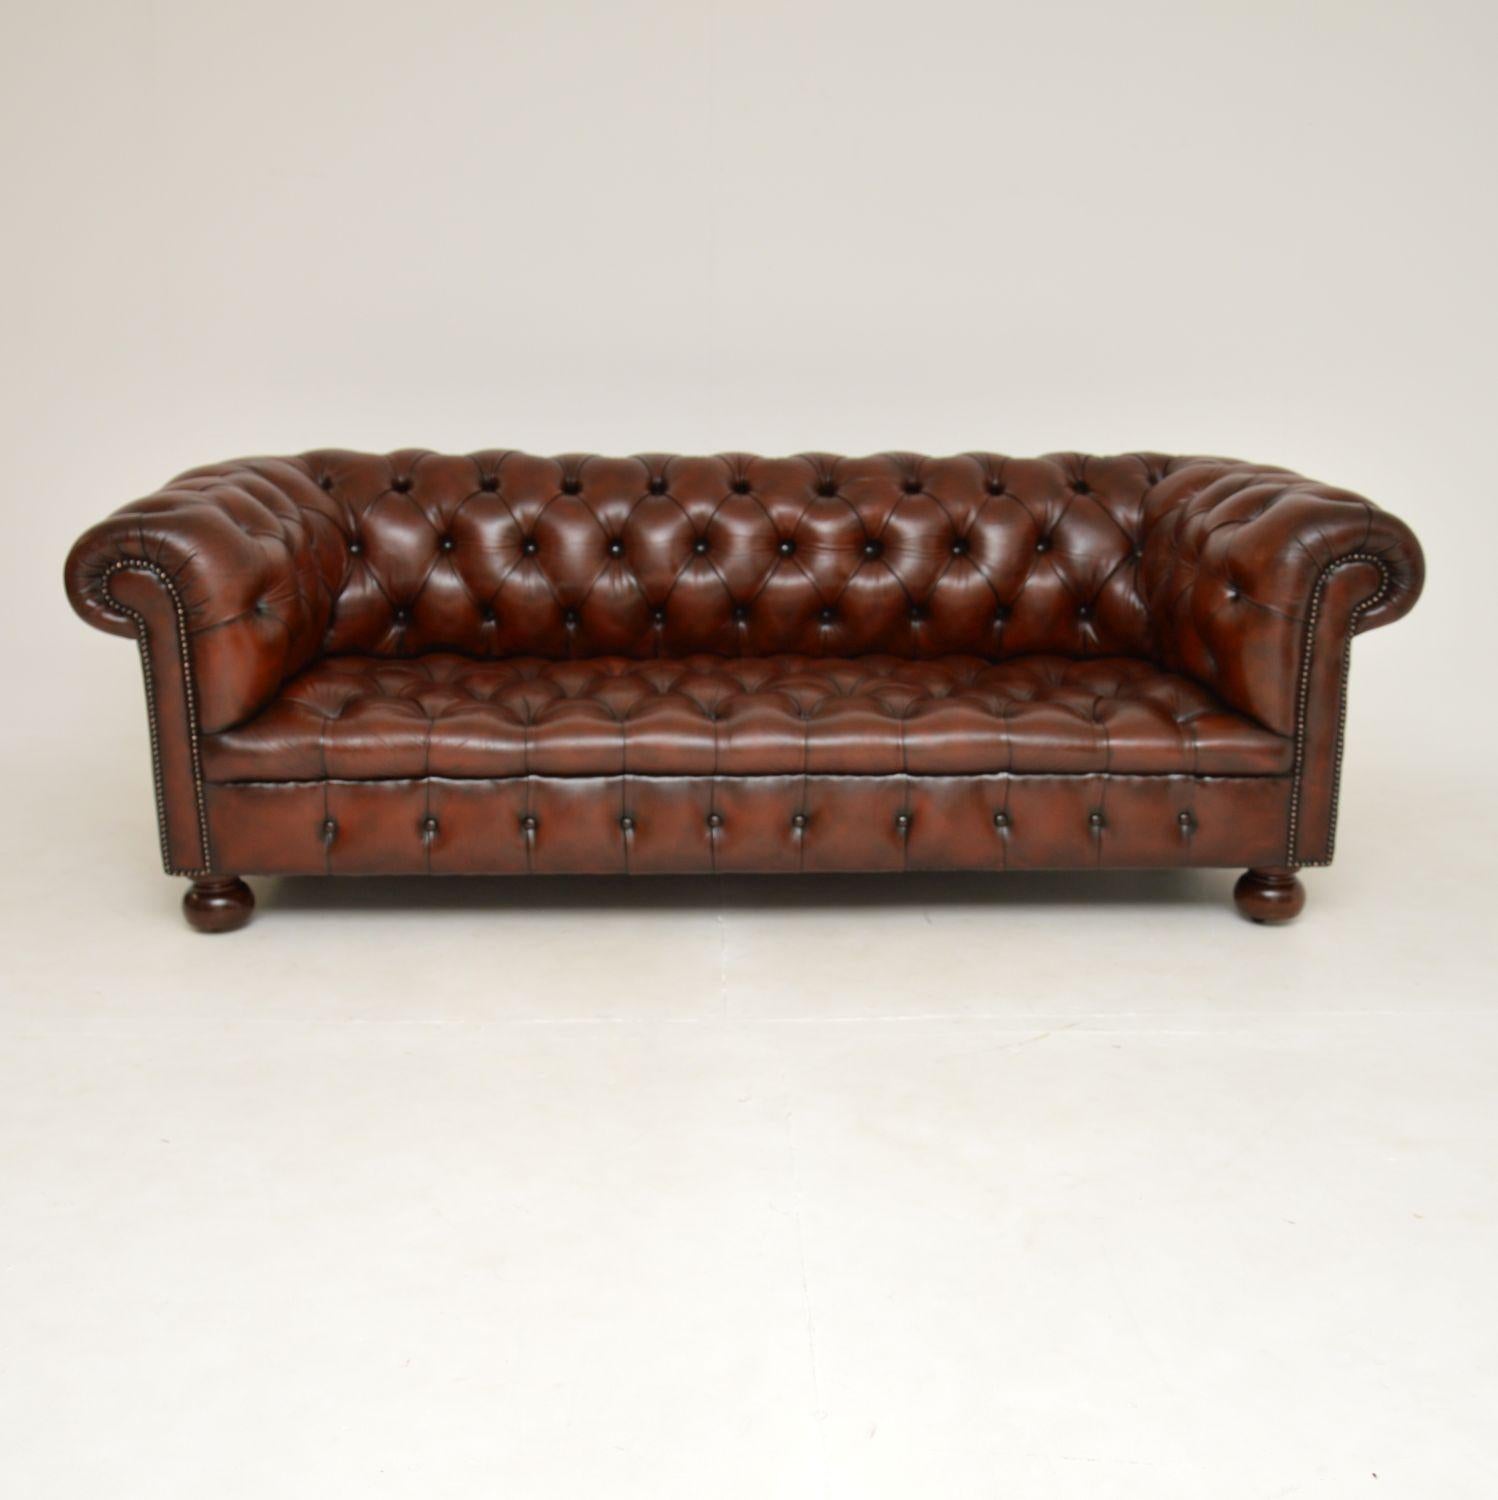 A stunning antique Victorian style Chesterfield sofa in brown leather. This was made in England, it dates from around the mid-twentieth century.

It has a stunning colour tone, it has a gorgeous overall look and is very comfortable too. It is of